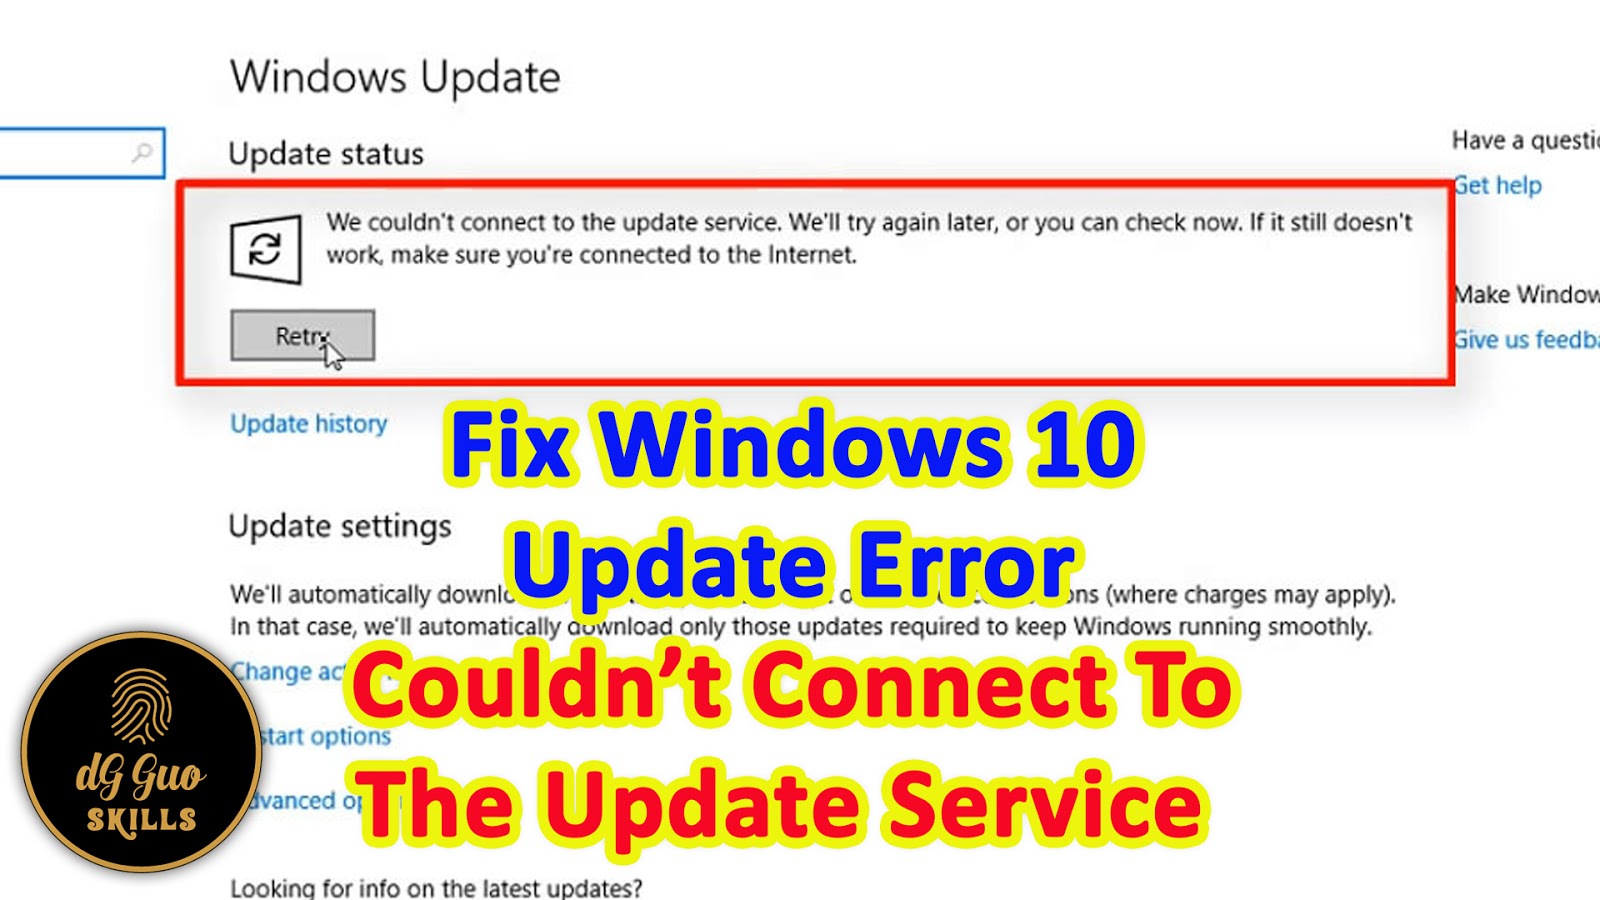 Failed to connect to a Windows service. Leonardo Updater update failed: connect.connect timed out. Couldn t update